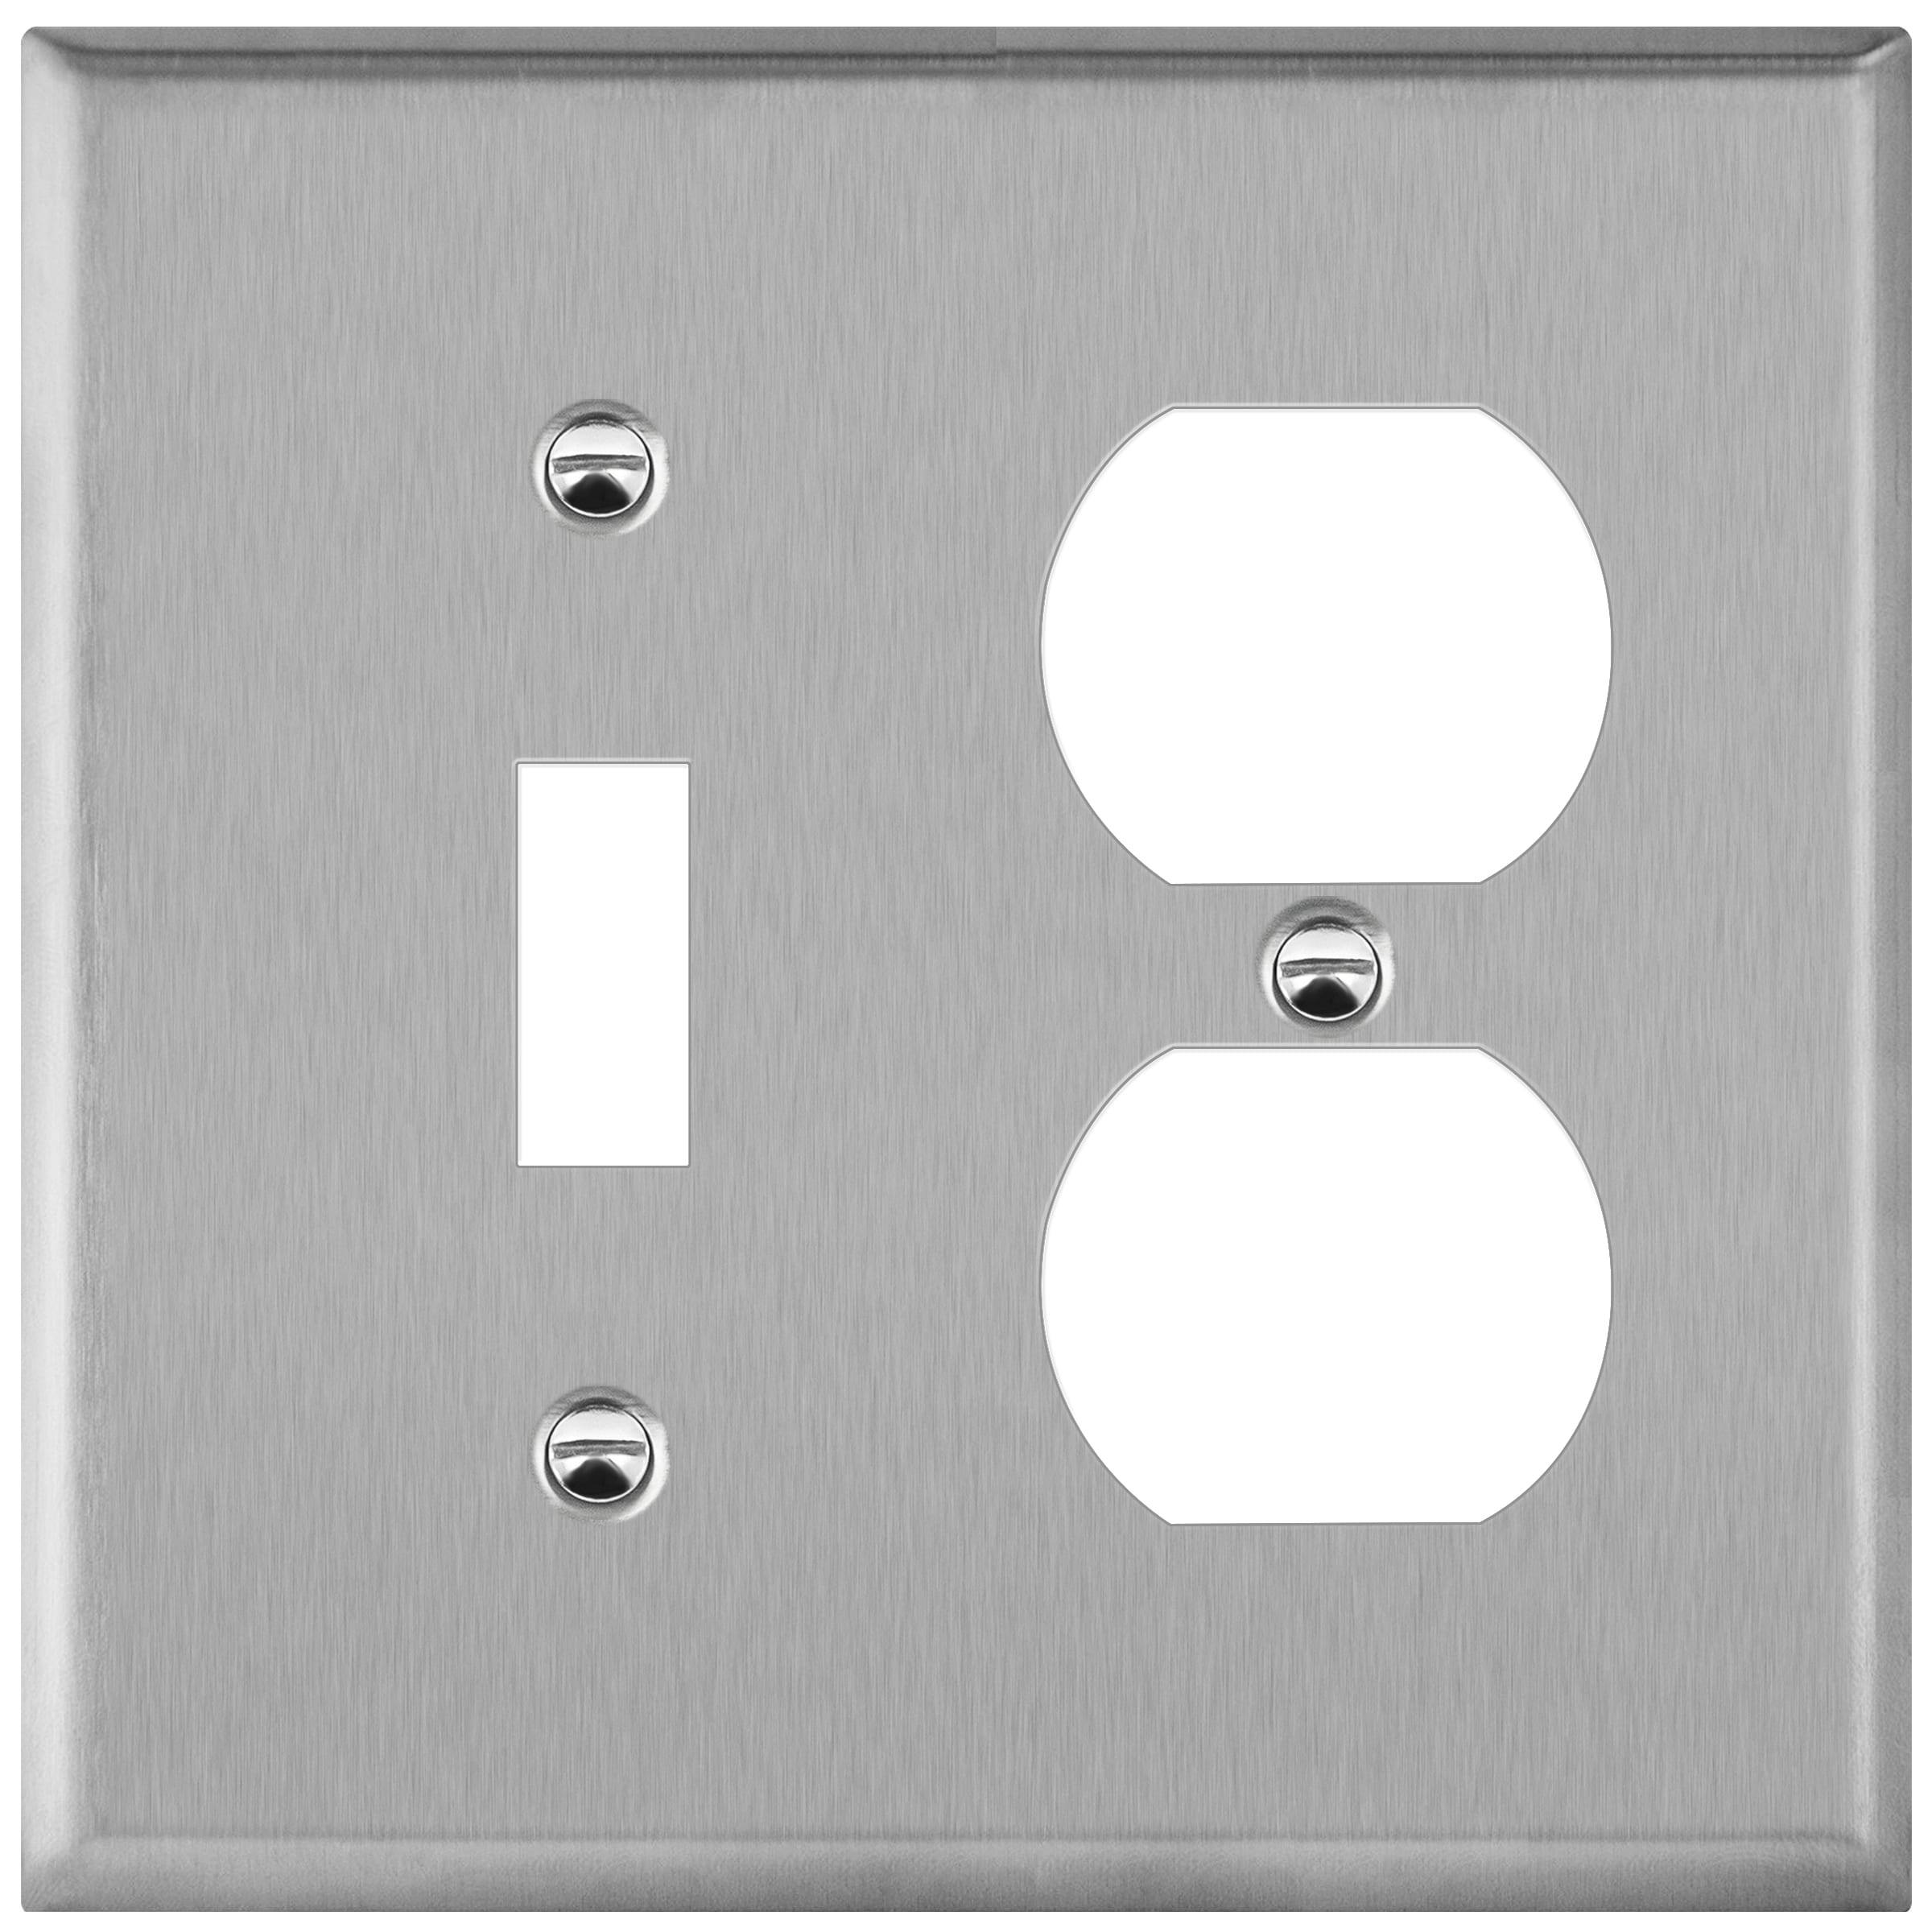 2 GANG COMBO SWITCH DUPLEX DECORA COMBINATION STAINLESS STEEL WALL COVER PLATE